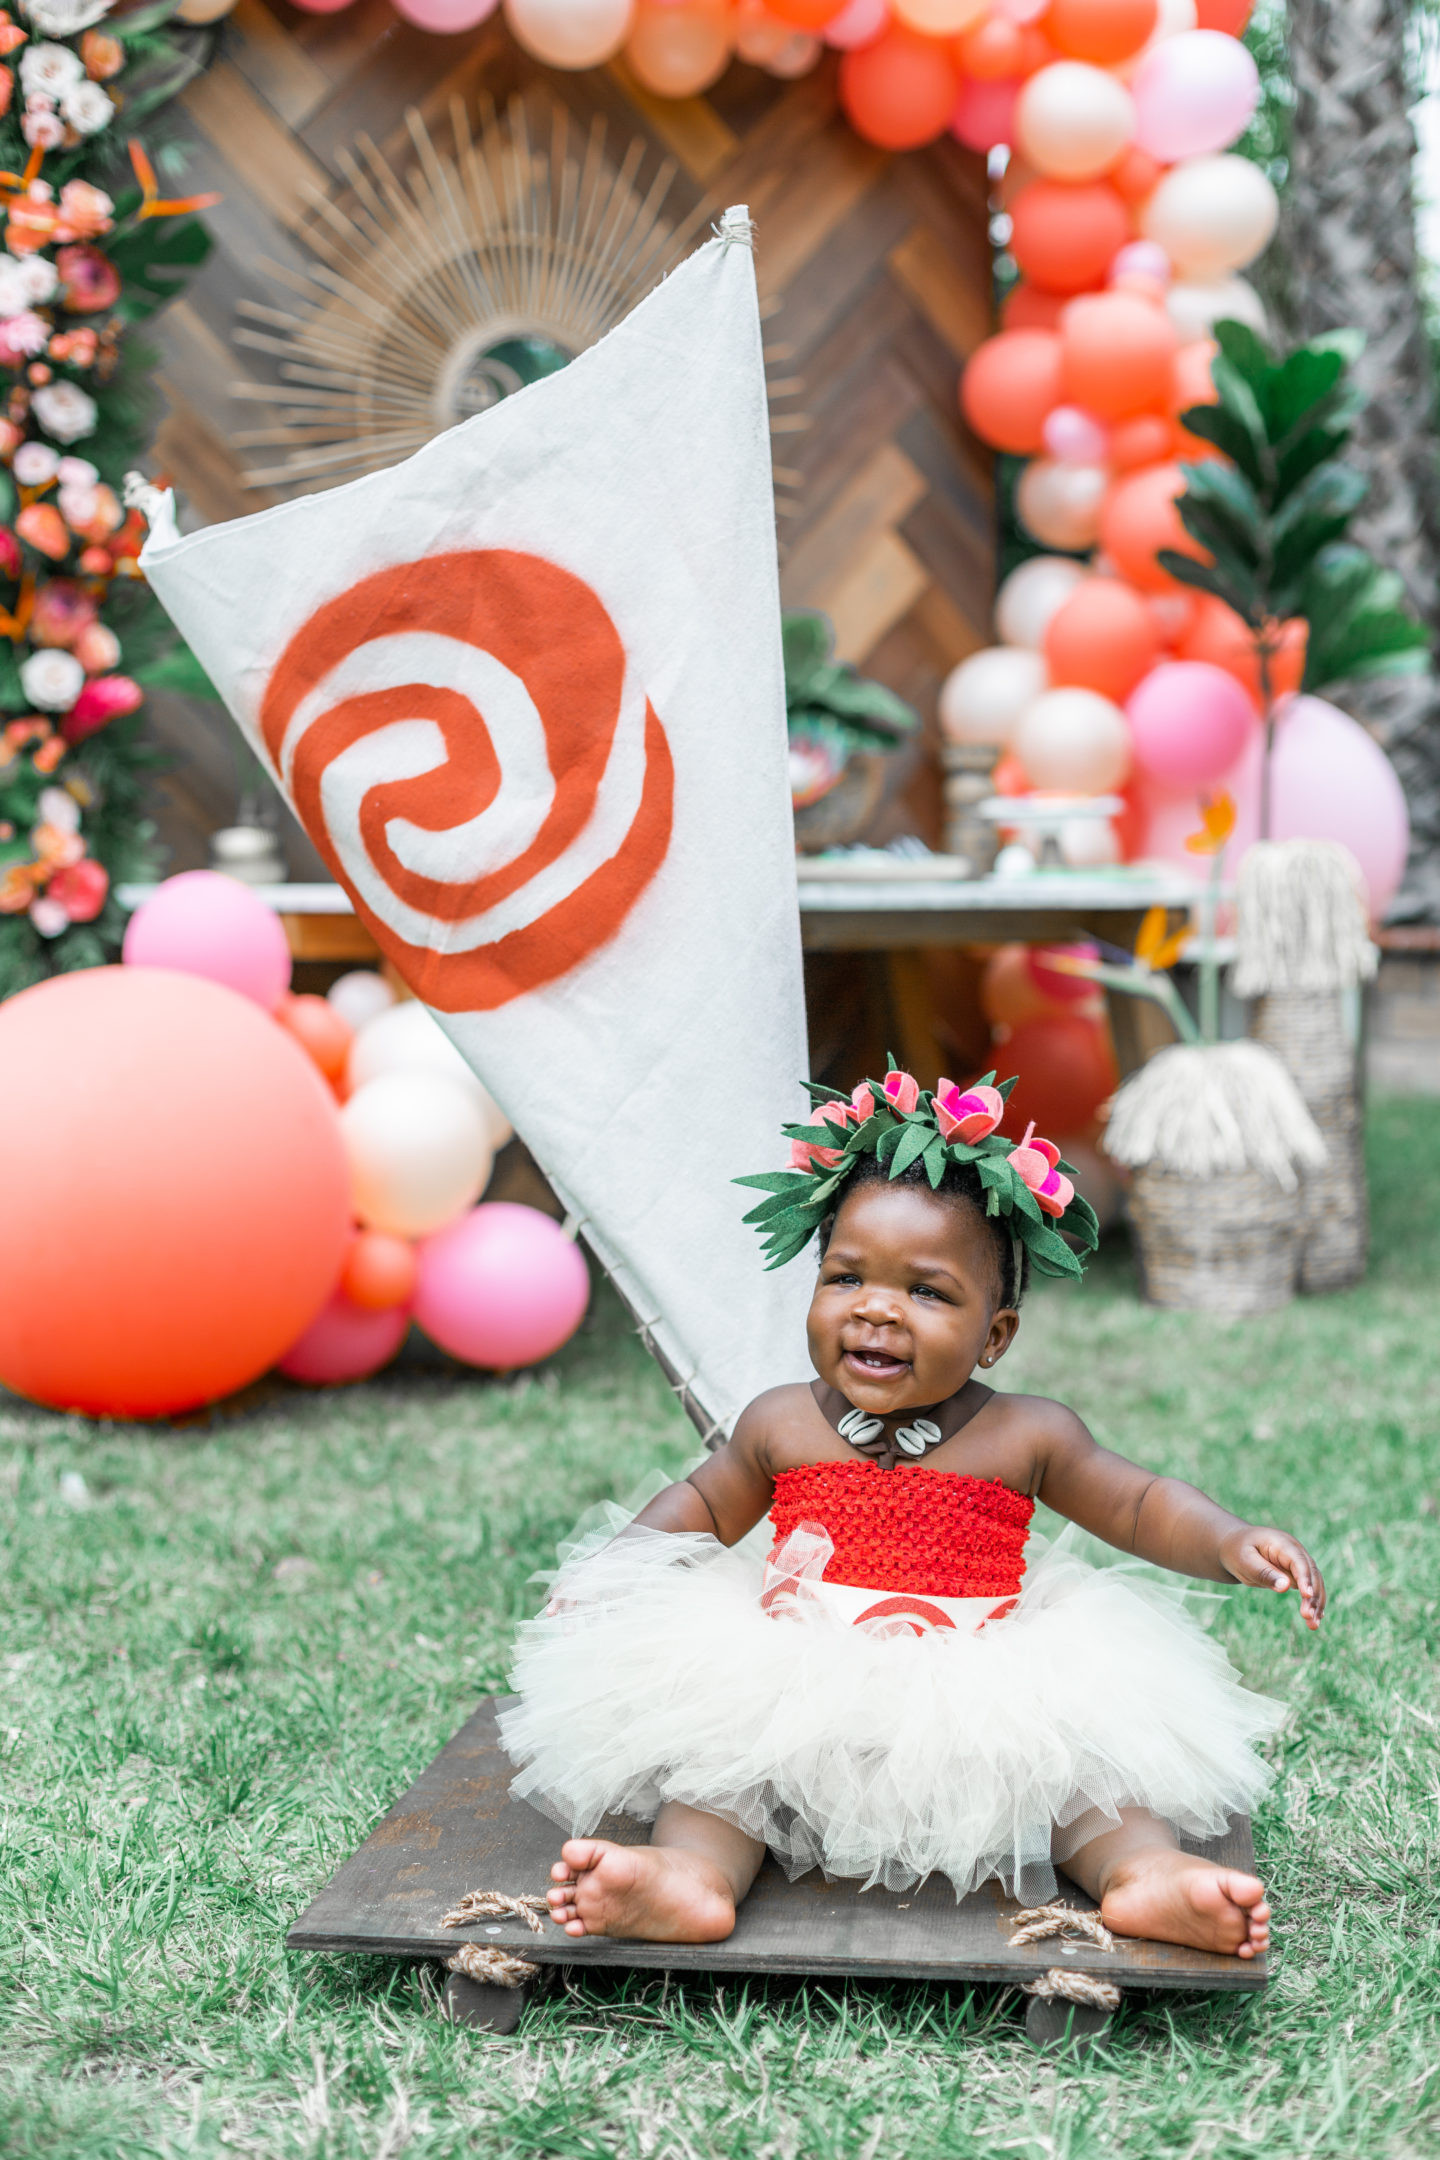 Baby'S First Birthday Gift Ideas For Her
 Moana First Birthday Party Ideas and Supplies